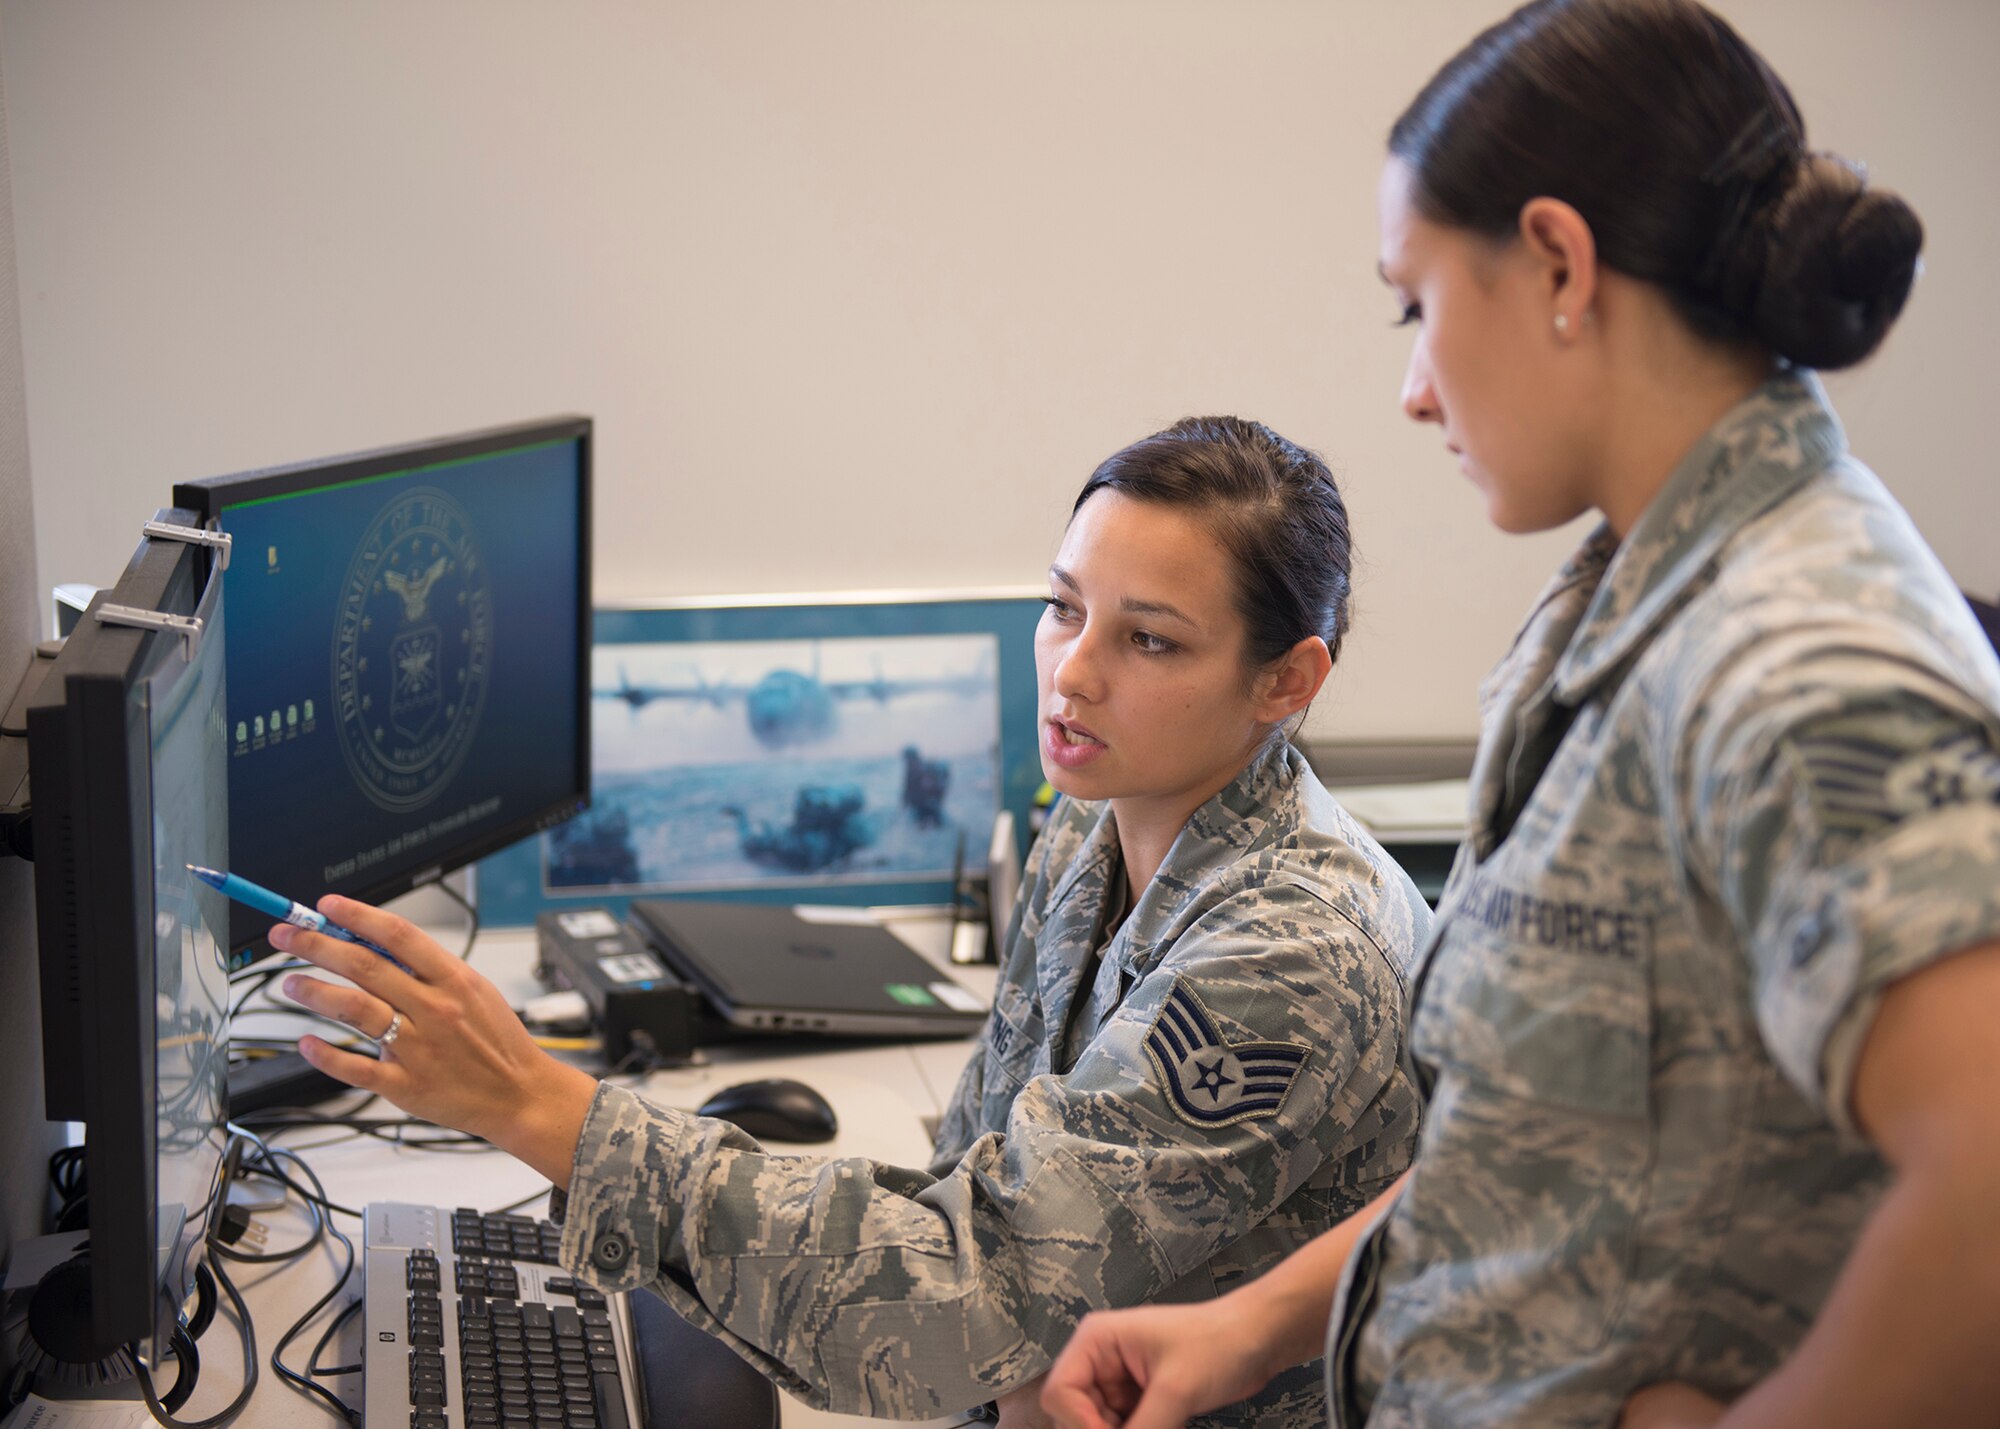 Staff Sgt. Amber Wood and Tech. Sgt. Erica Elking, 919th Special Operations Force Support Squadron, review personnel records Aug. 6 at Duke Field Fla.  (U.S. Air Force photo/Tech. Sgt. Jon McCallum)